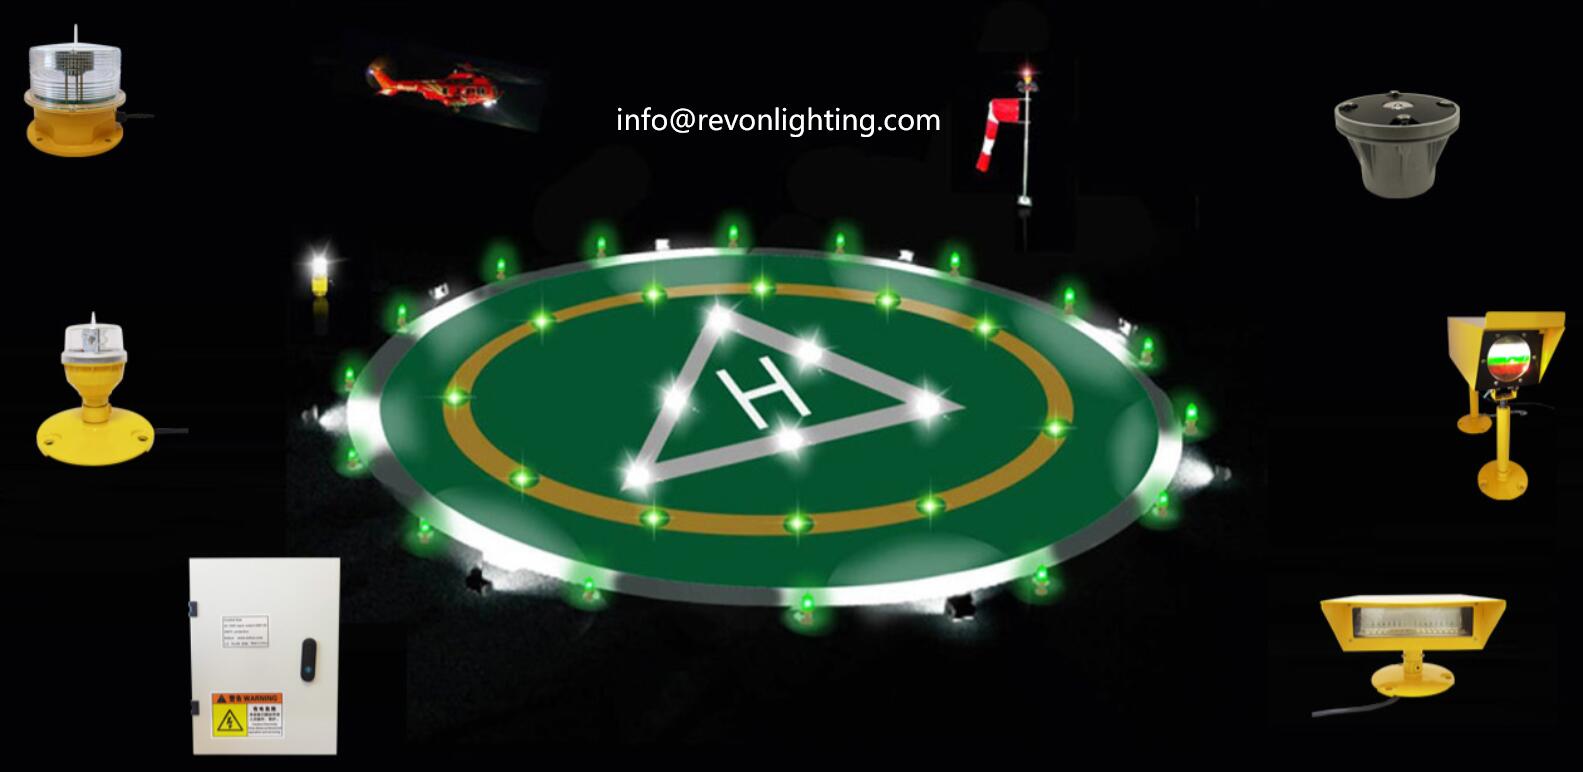 Heliport Lighting: Enhancing Safety and Efficiency for Helicopter Operations